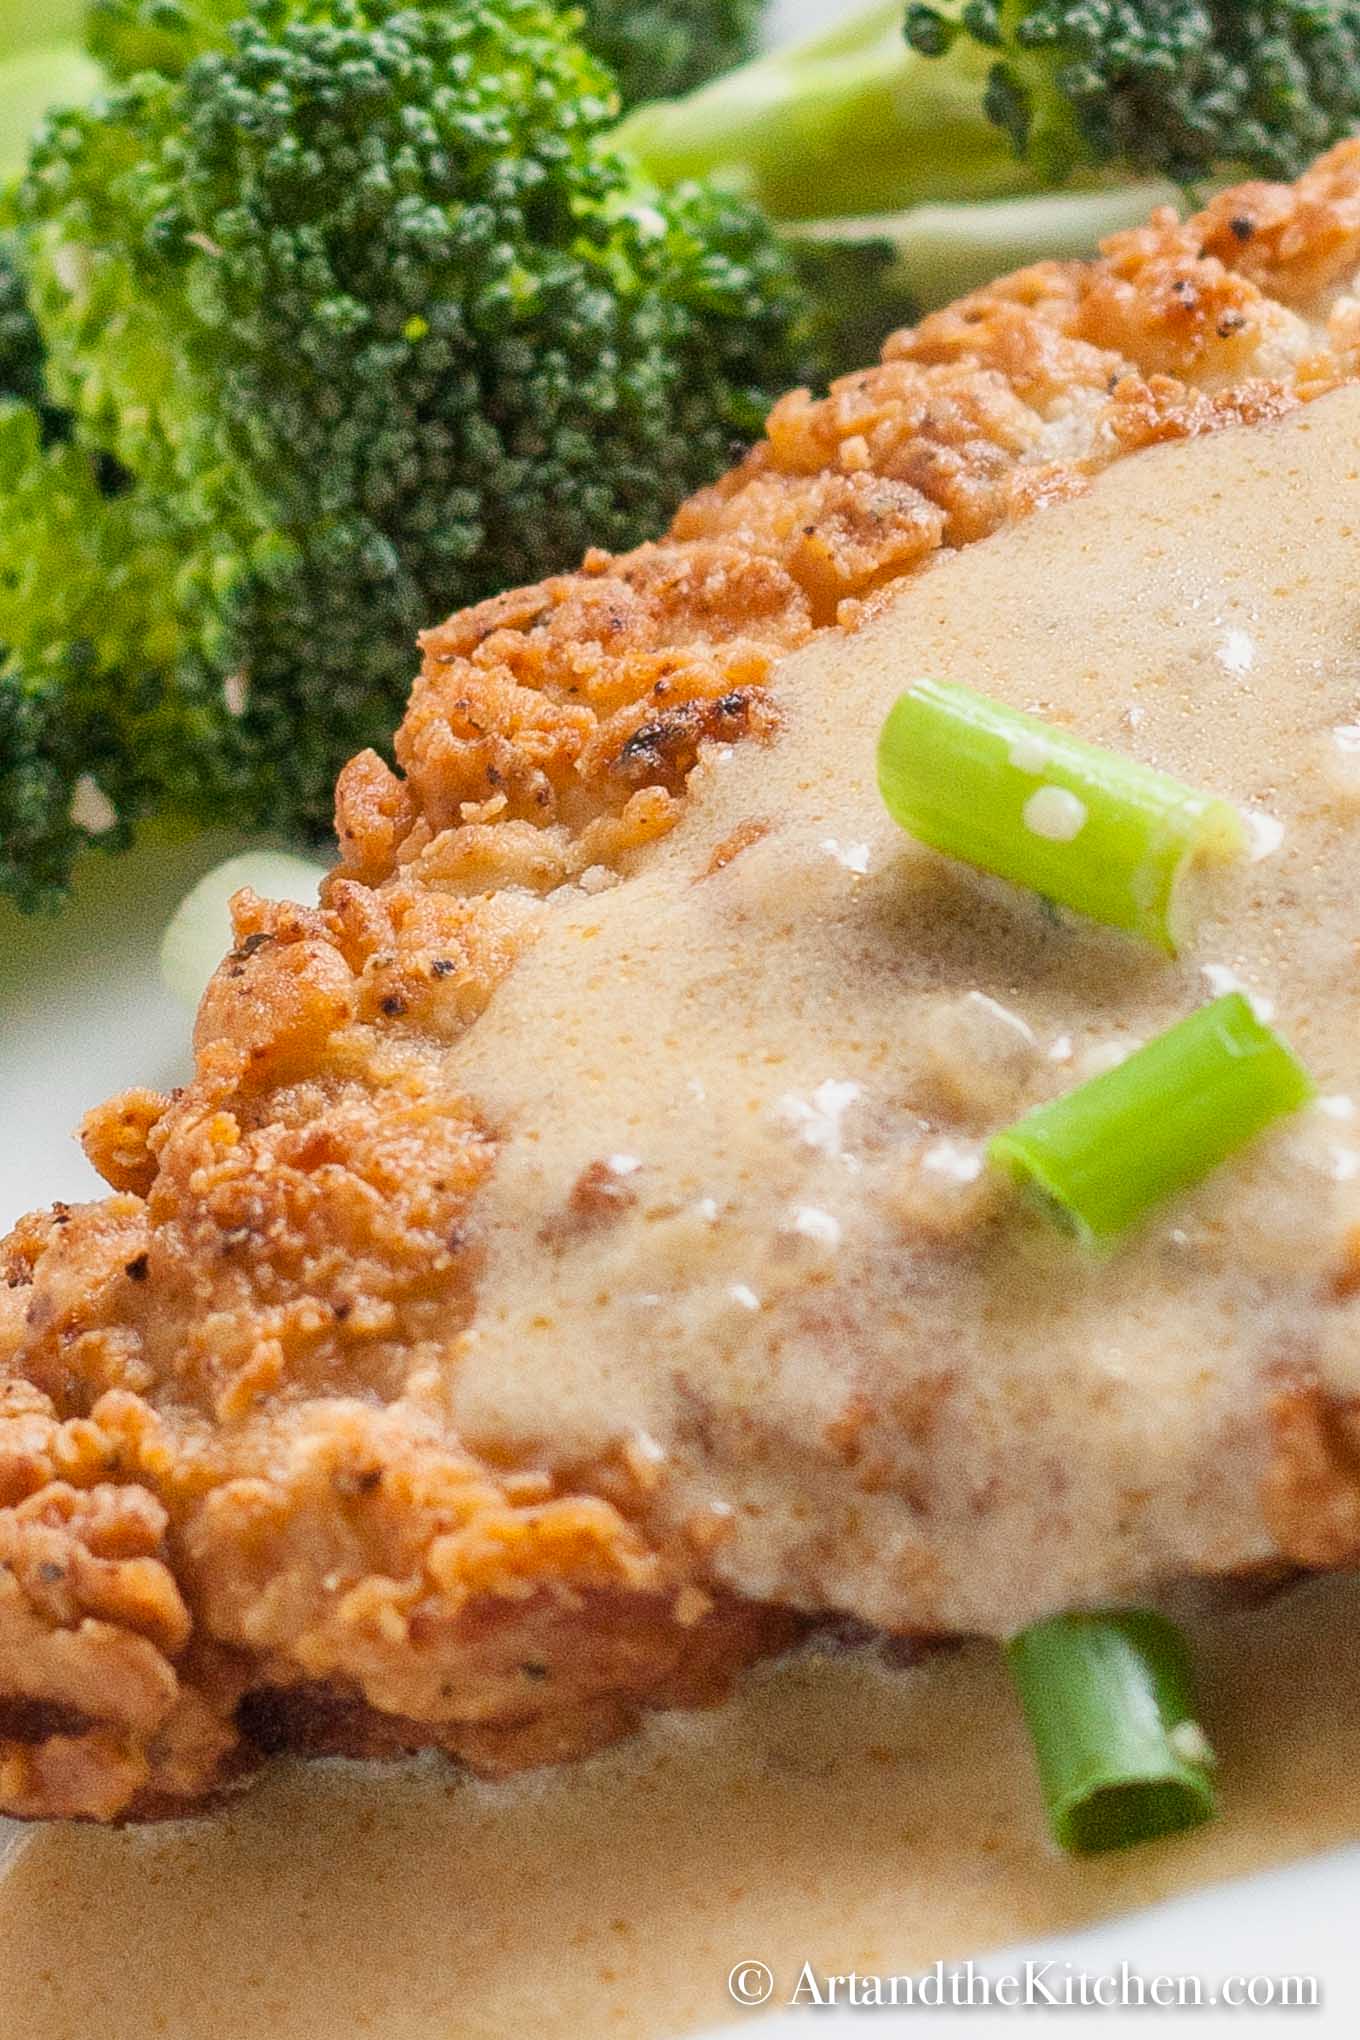 Golden brown fried pork schnitzel topped with a mustard sauce and garnished with green onion slices.